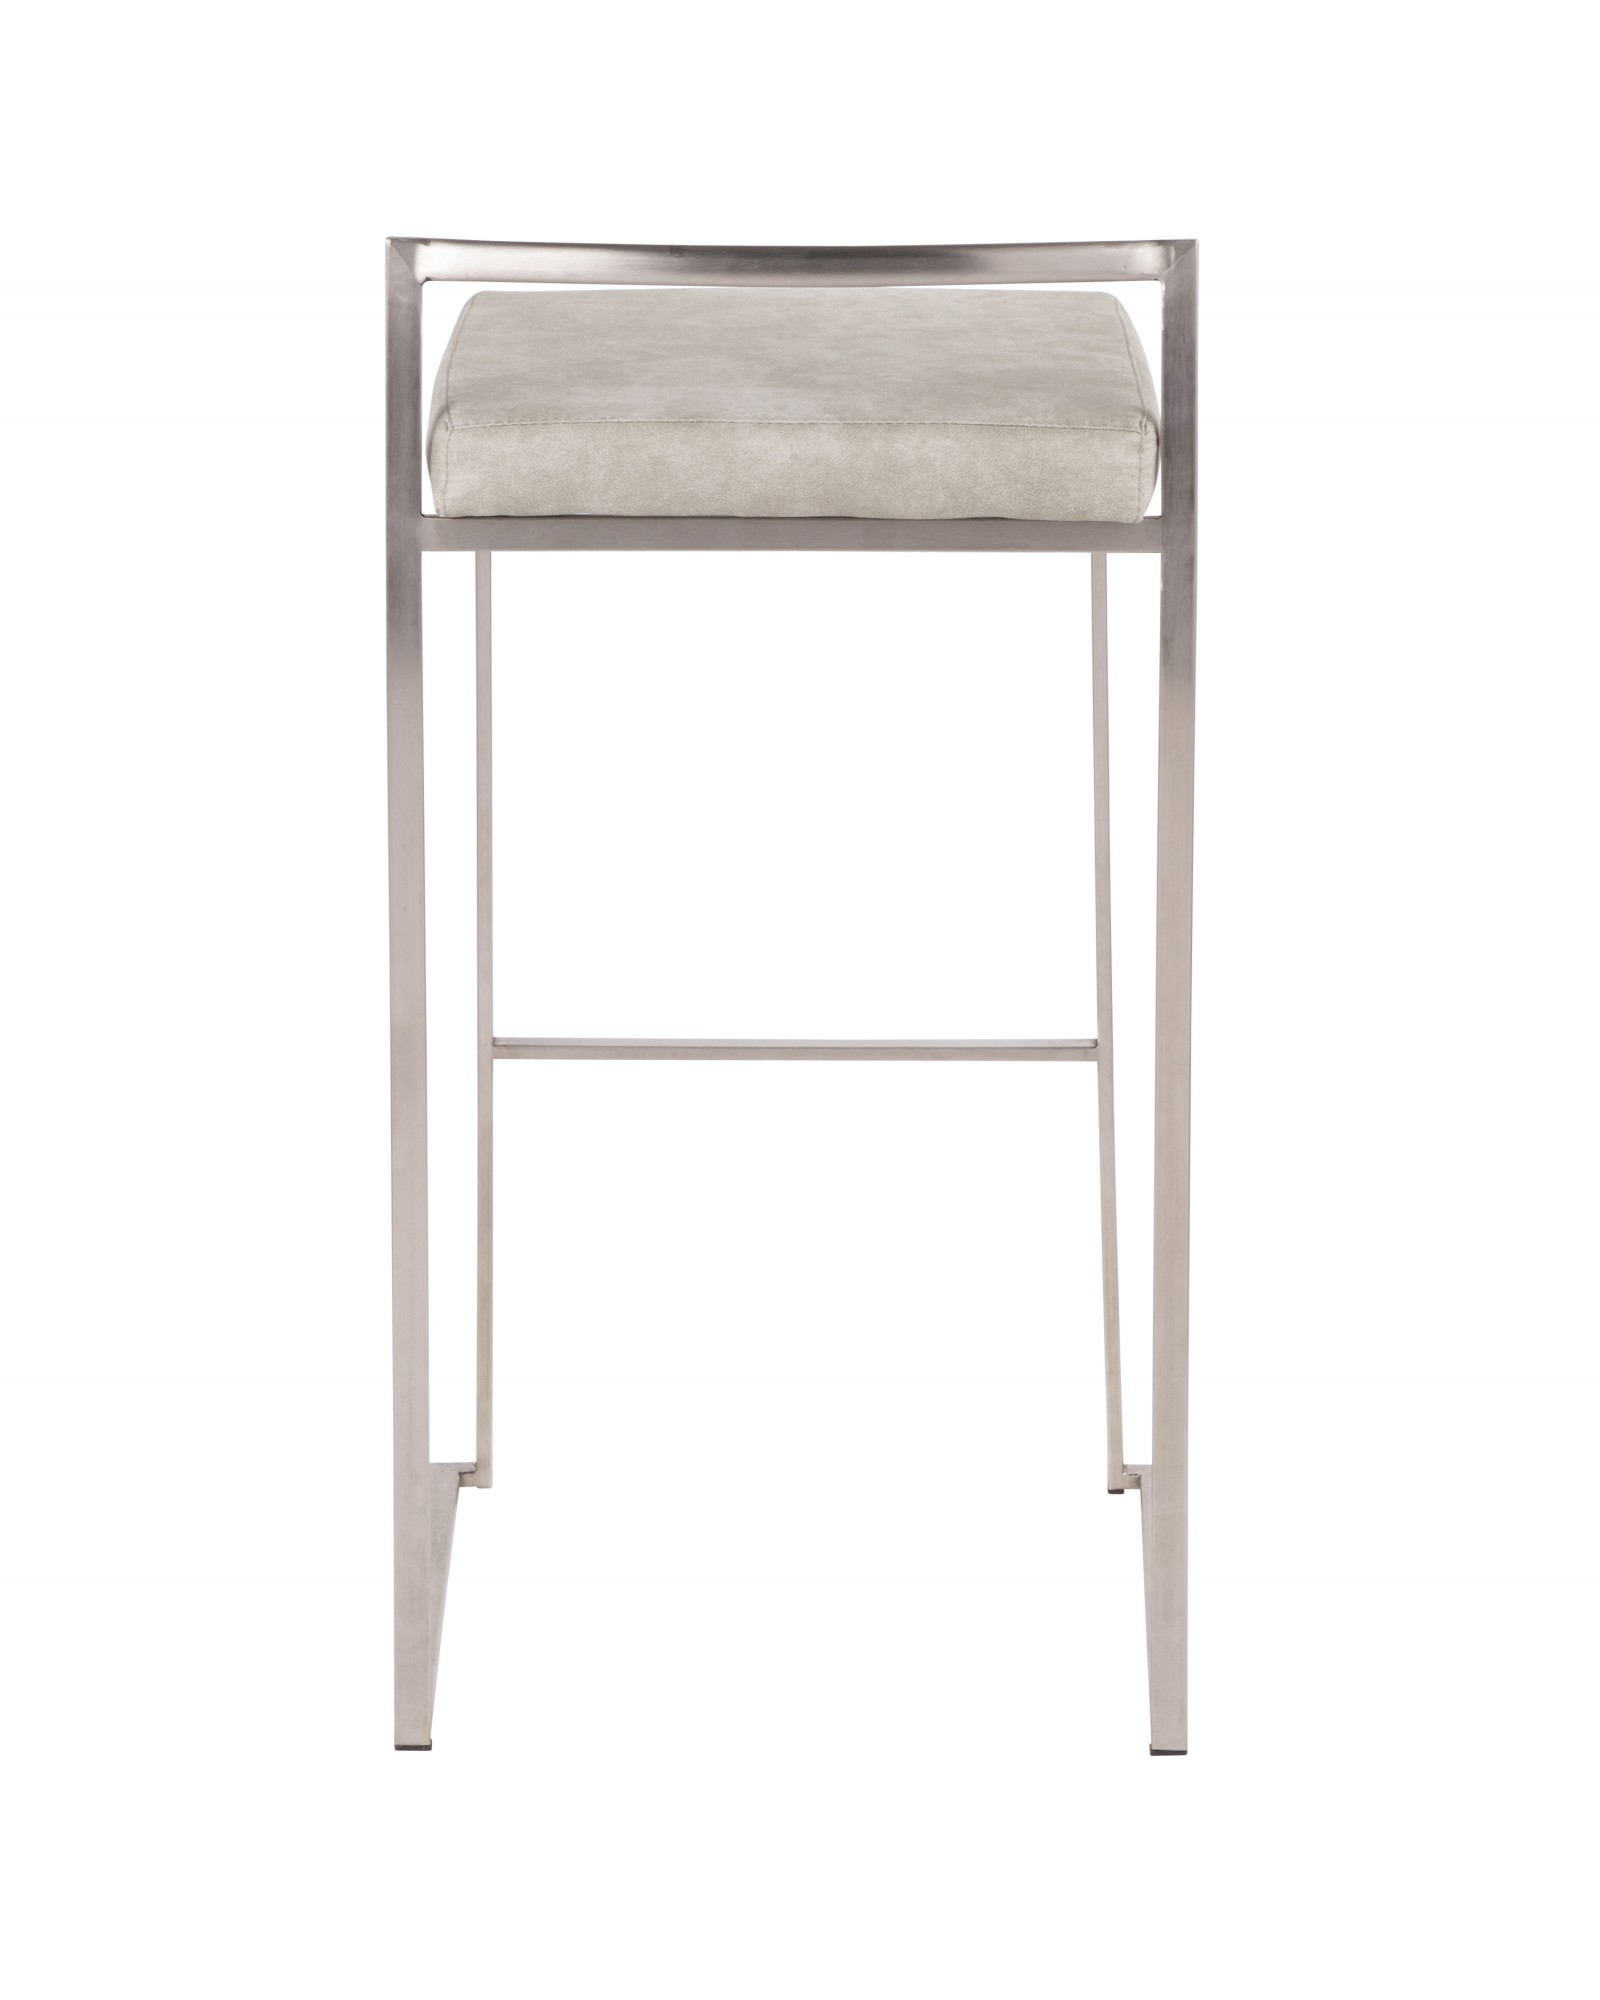 Fuji Contemporary Stackable Barstool in Stainless Steel with Light Grey Cowboy Fabric Cushion - Set of 2